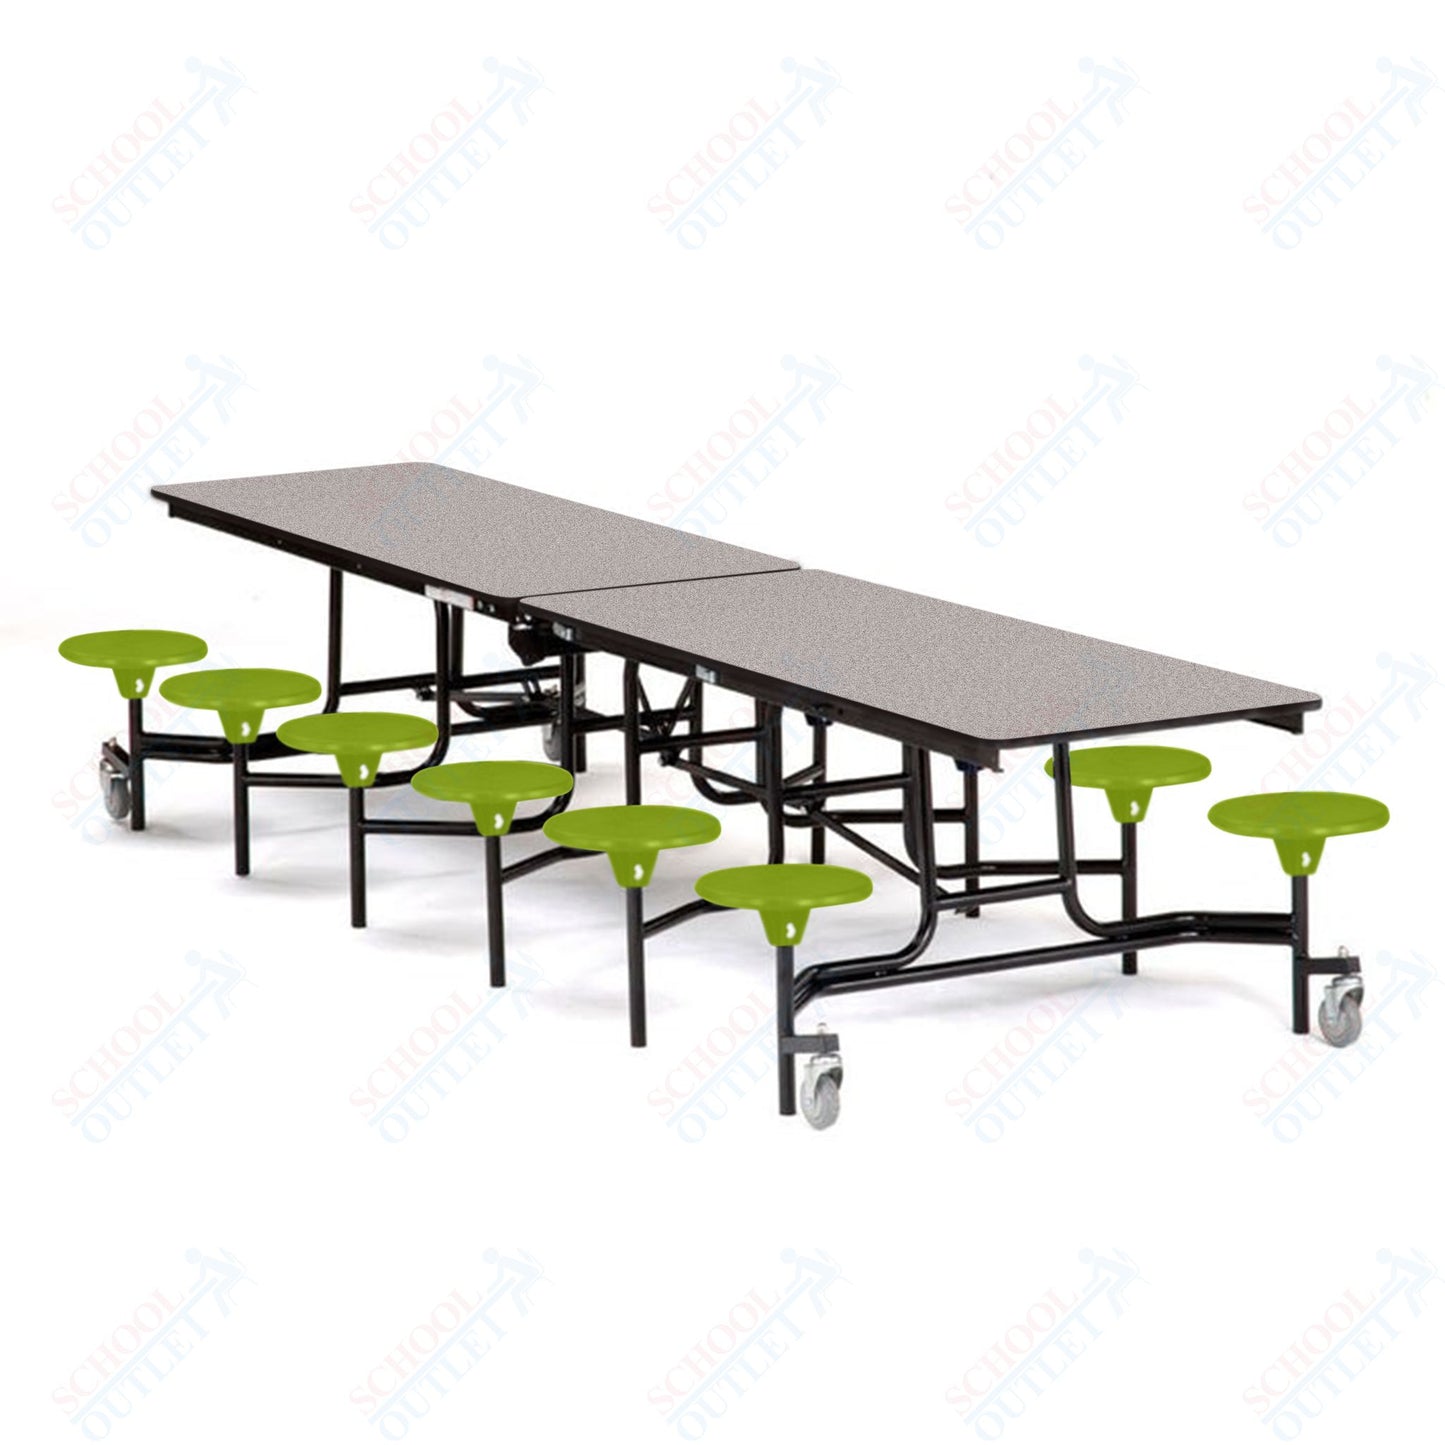 Mobile Cafeteria Lunchroom Stool Table - 30" W x 12' L - 12 Stools - Plywood Core - Protect Edge - Chrome Frame